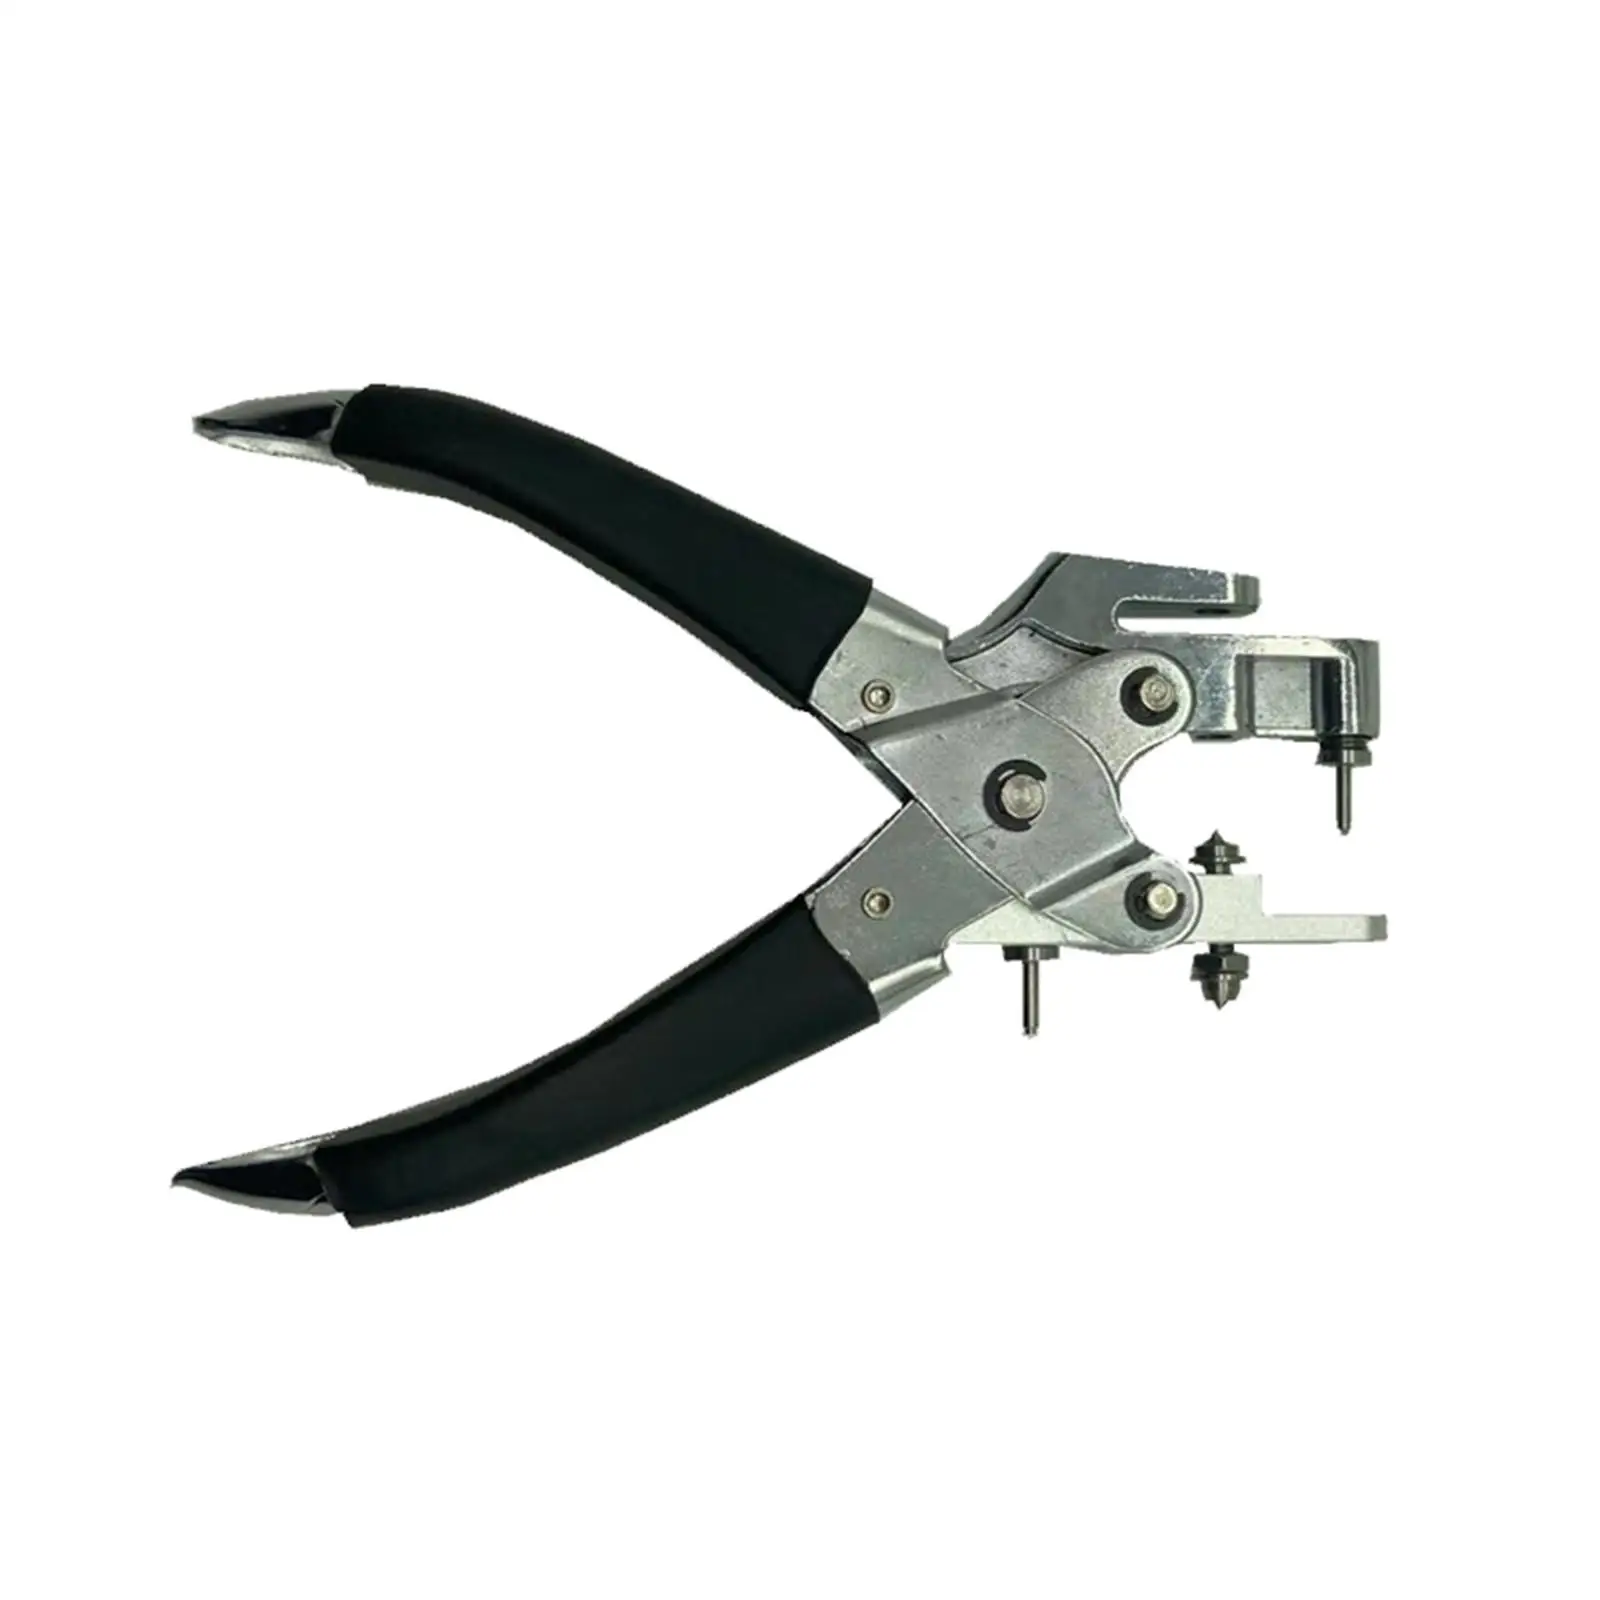 Badminton Machine String Plier Removal Install Eyelet Racquet Sports Grommets Pliers Tennis Racquet Badminton String Clamp